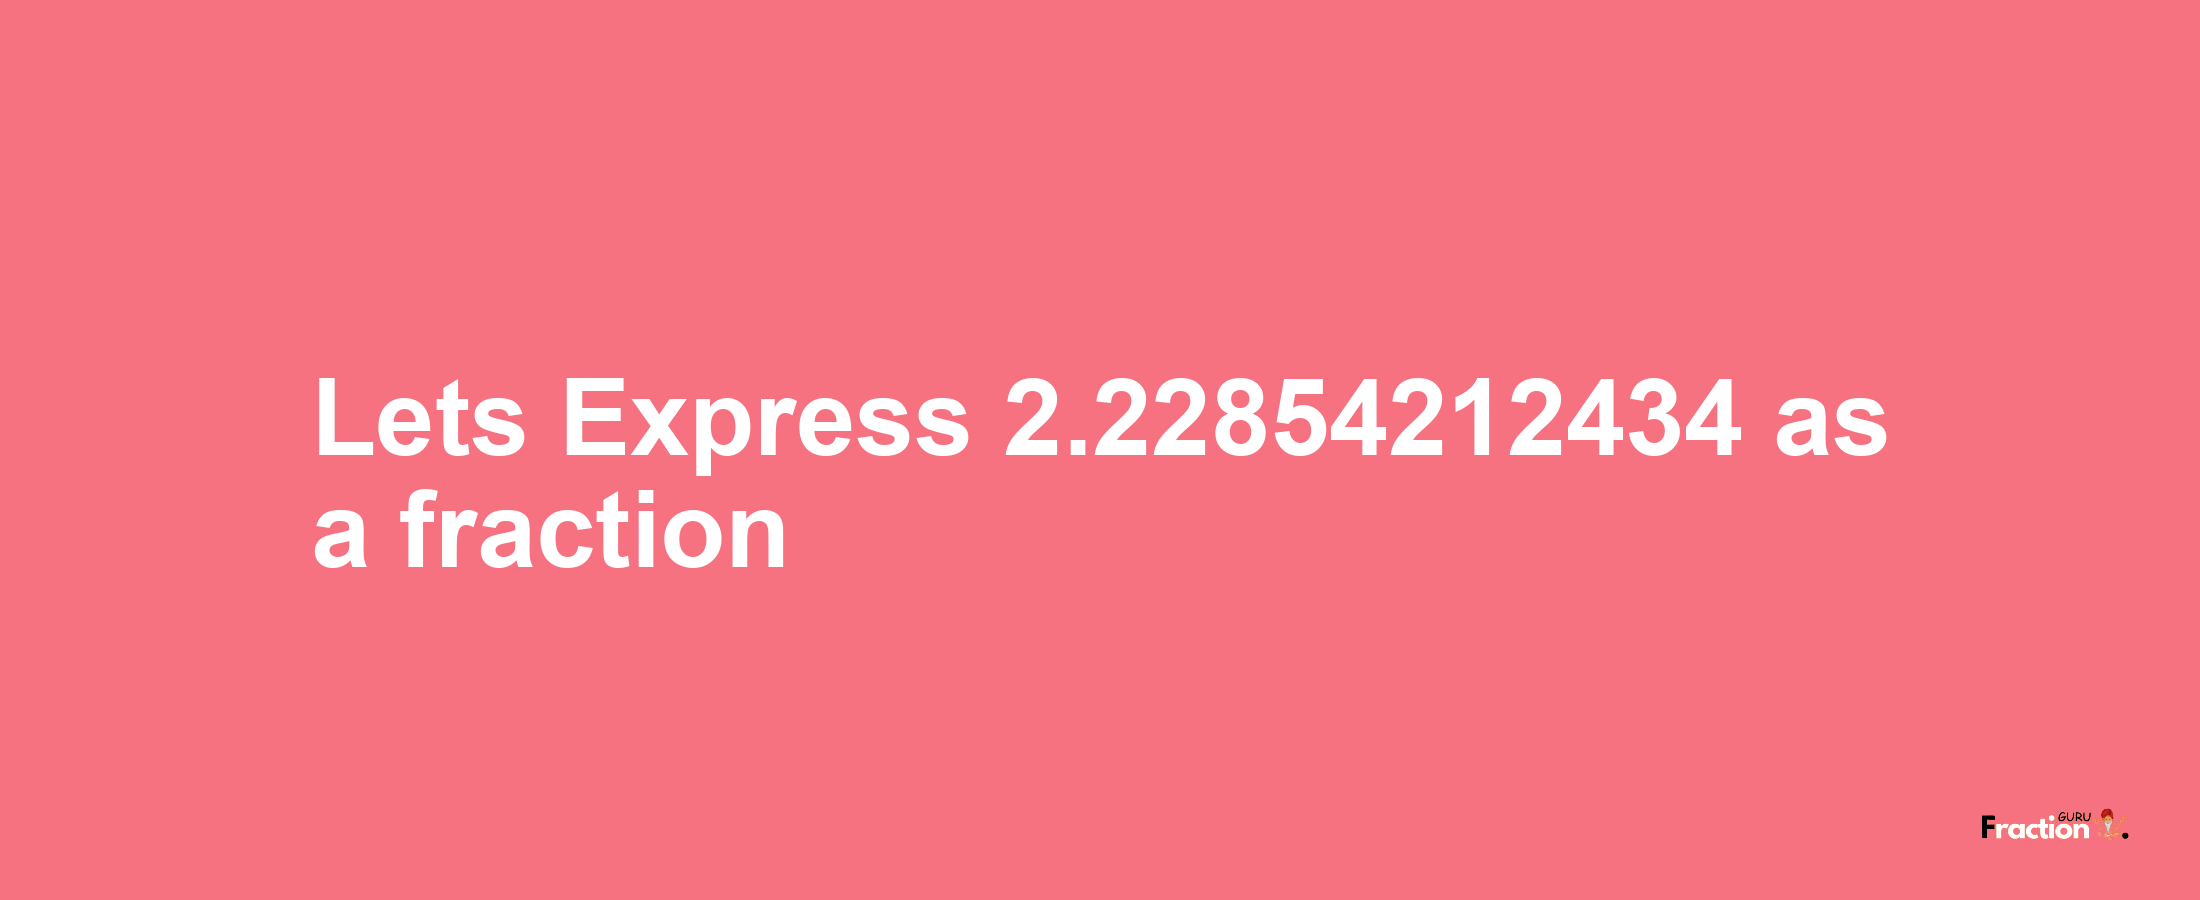 Lets Express 2.22854212434 as afraction